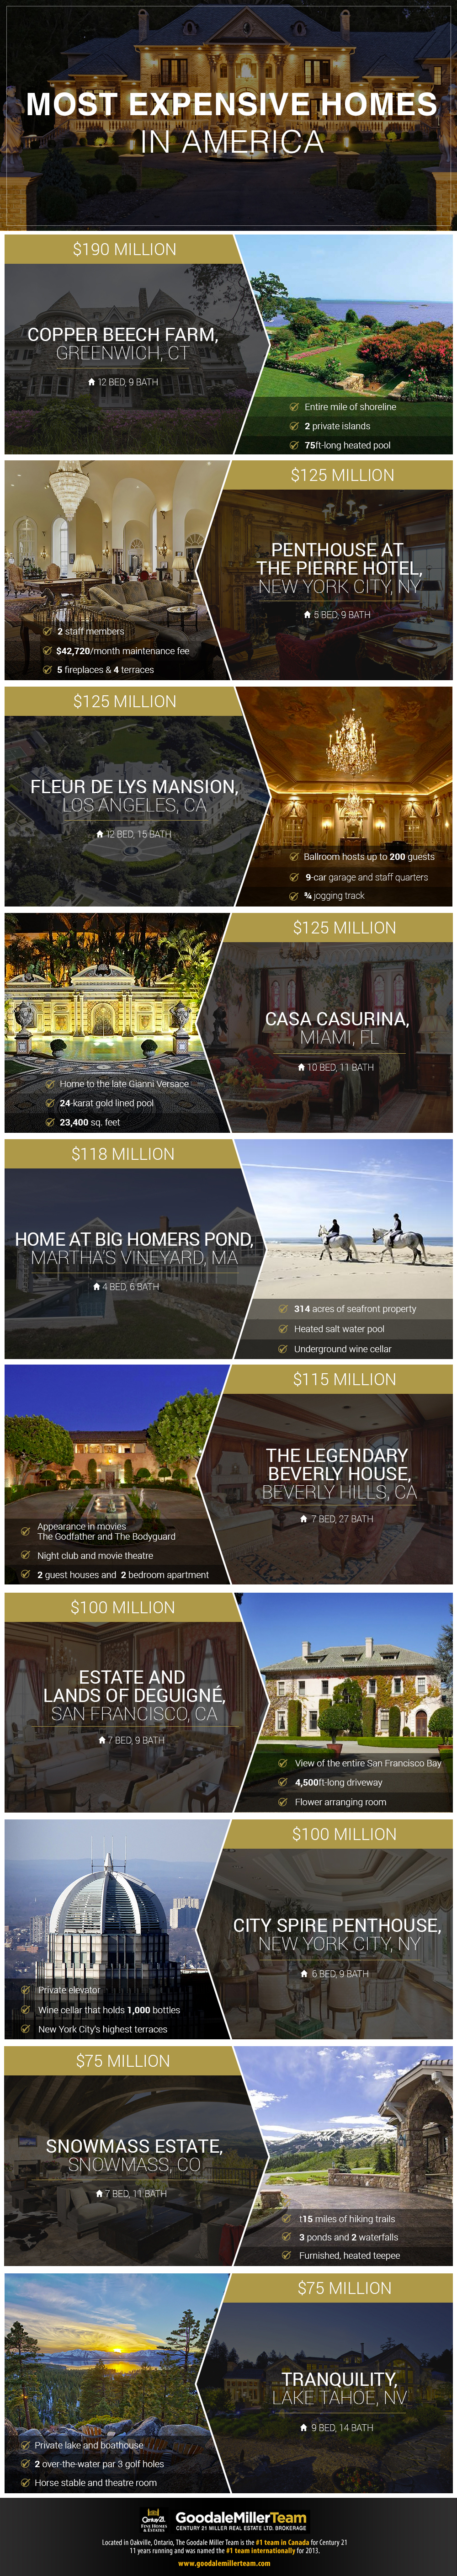 The Most Expensive Homes in the USA!